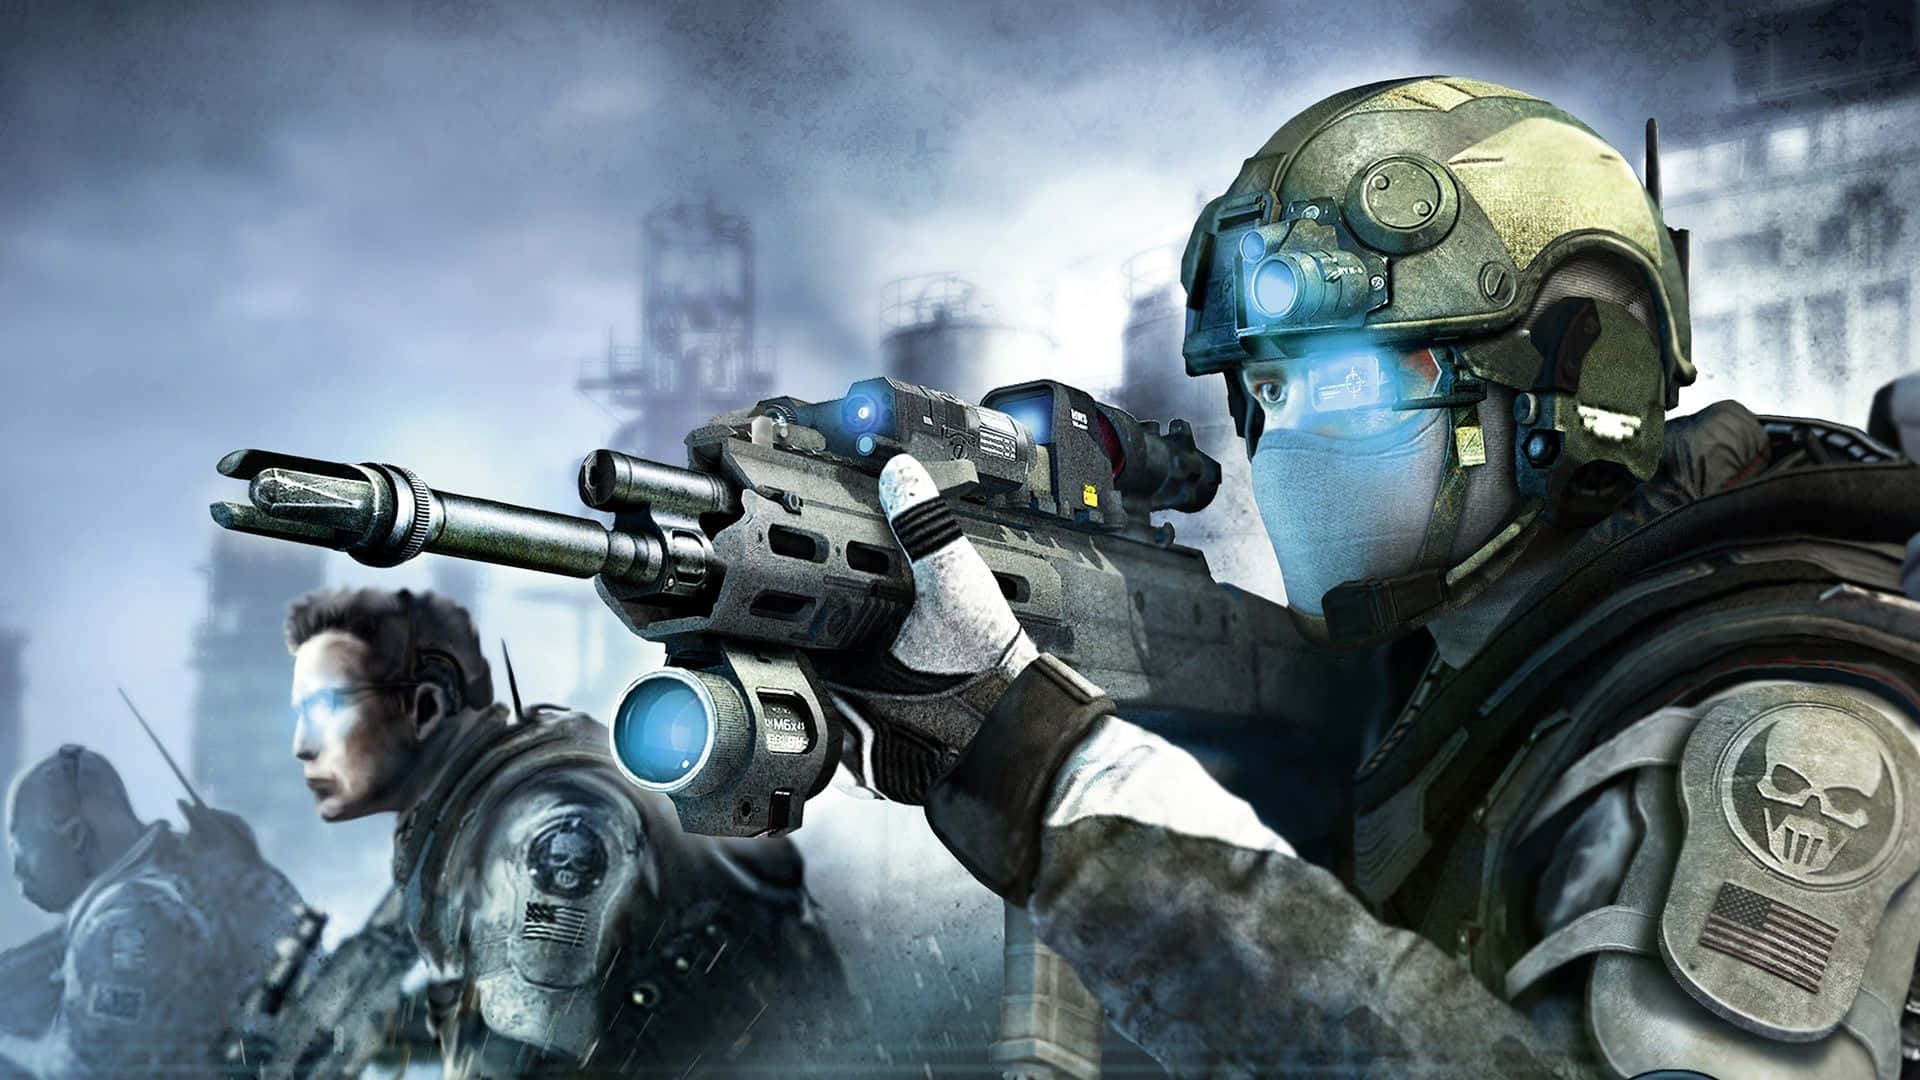 Find the Target in this Action-Packed Shooting Game Wallpaper